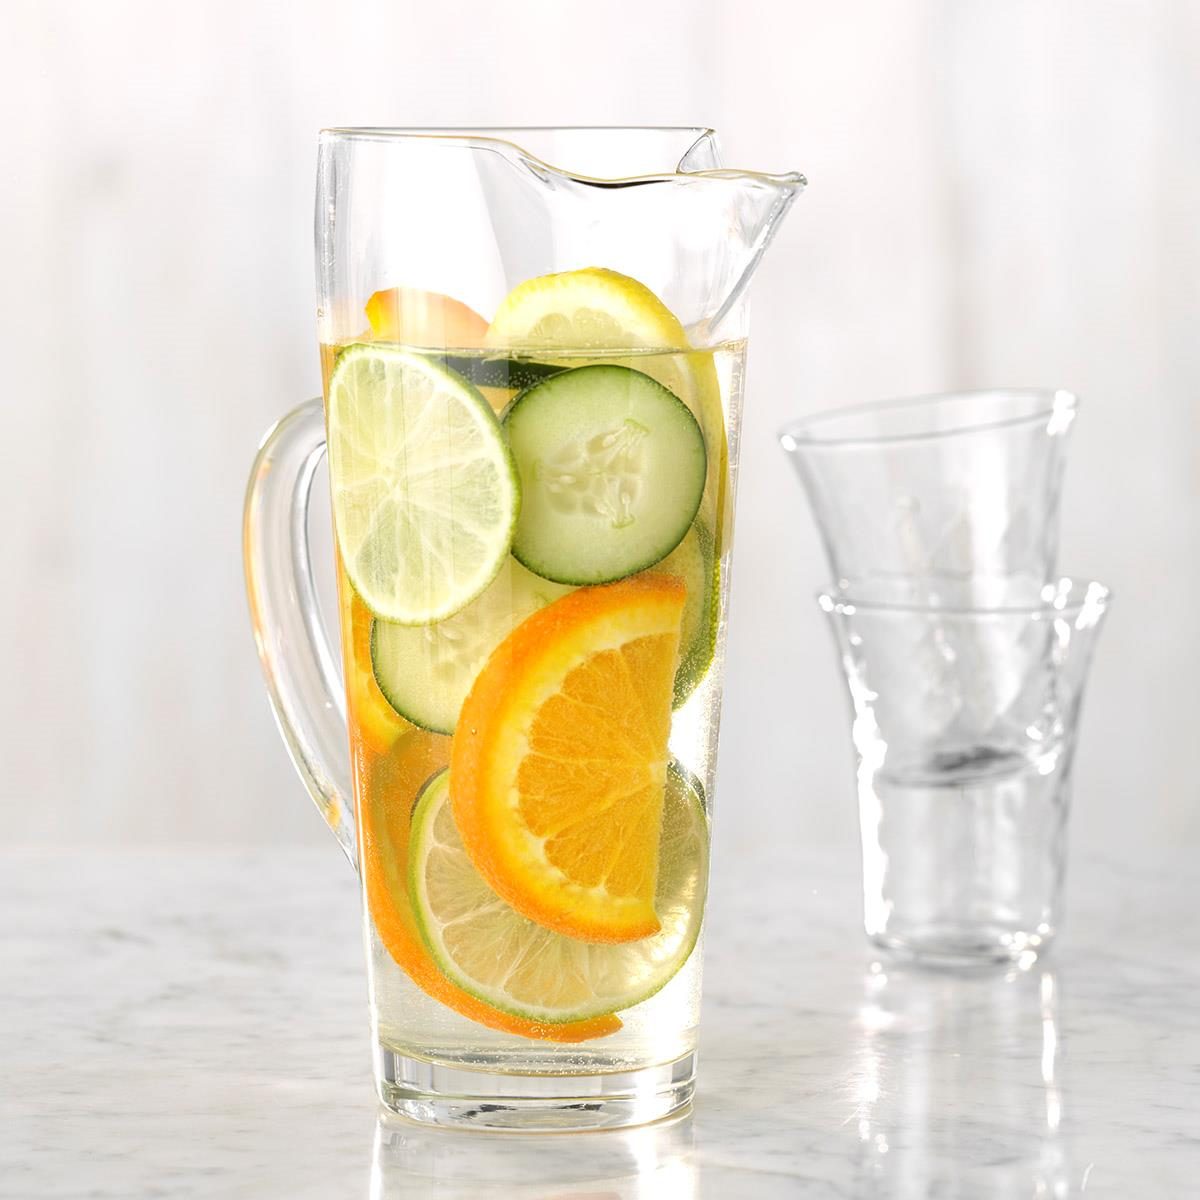 Citrus And Cucumber Infused Water Exps Jmz18 224885 C03 07 6b 11